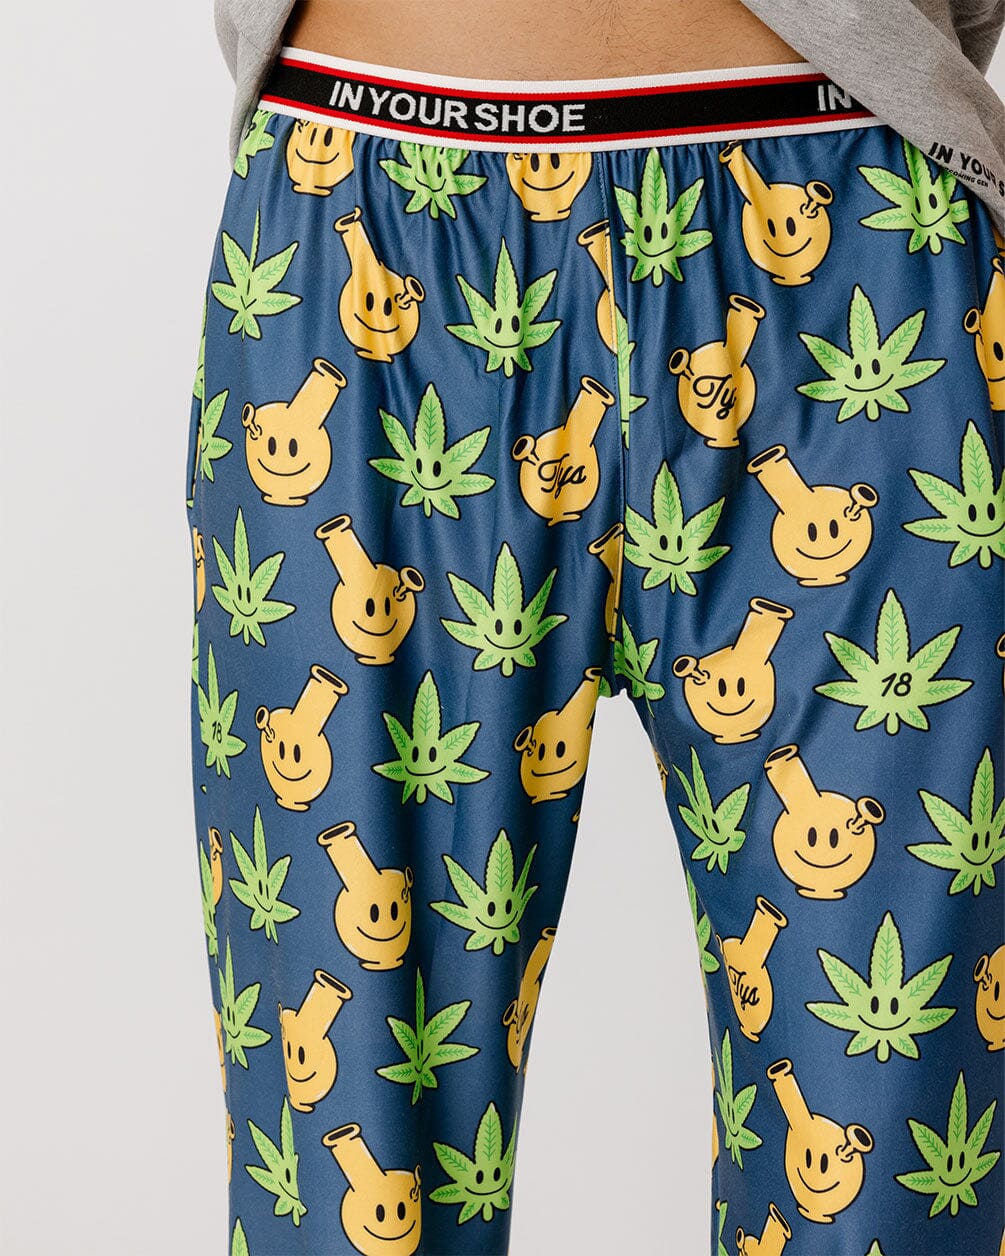 Weed - Pjoys PJOYS In Your Shoe XL 